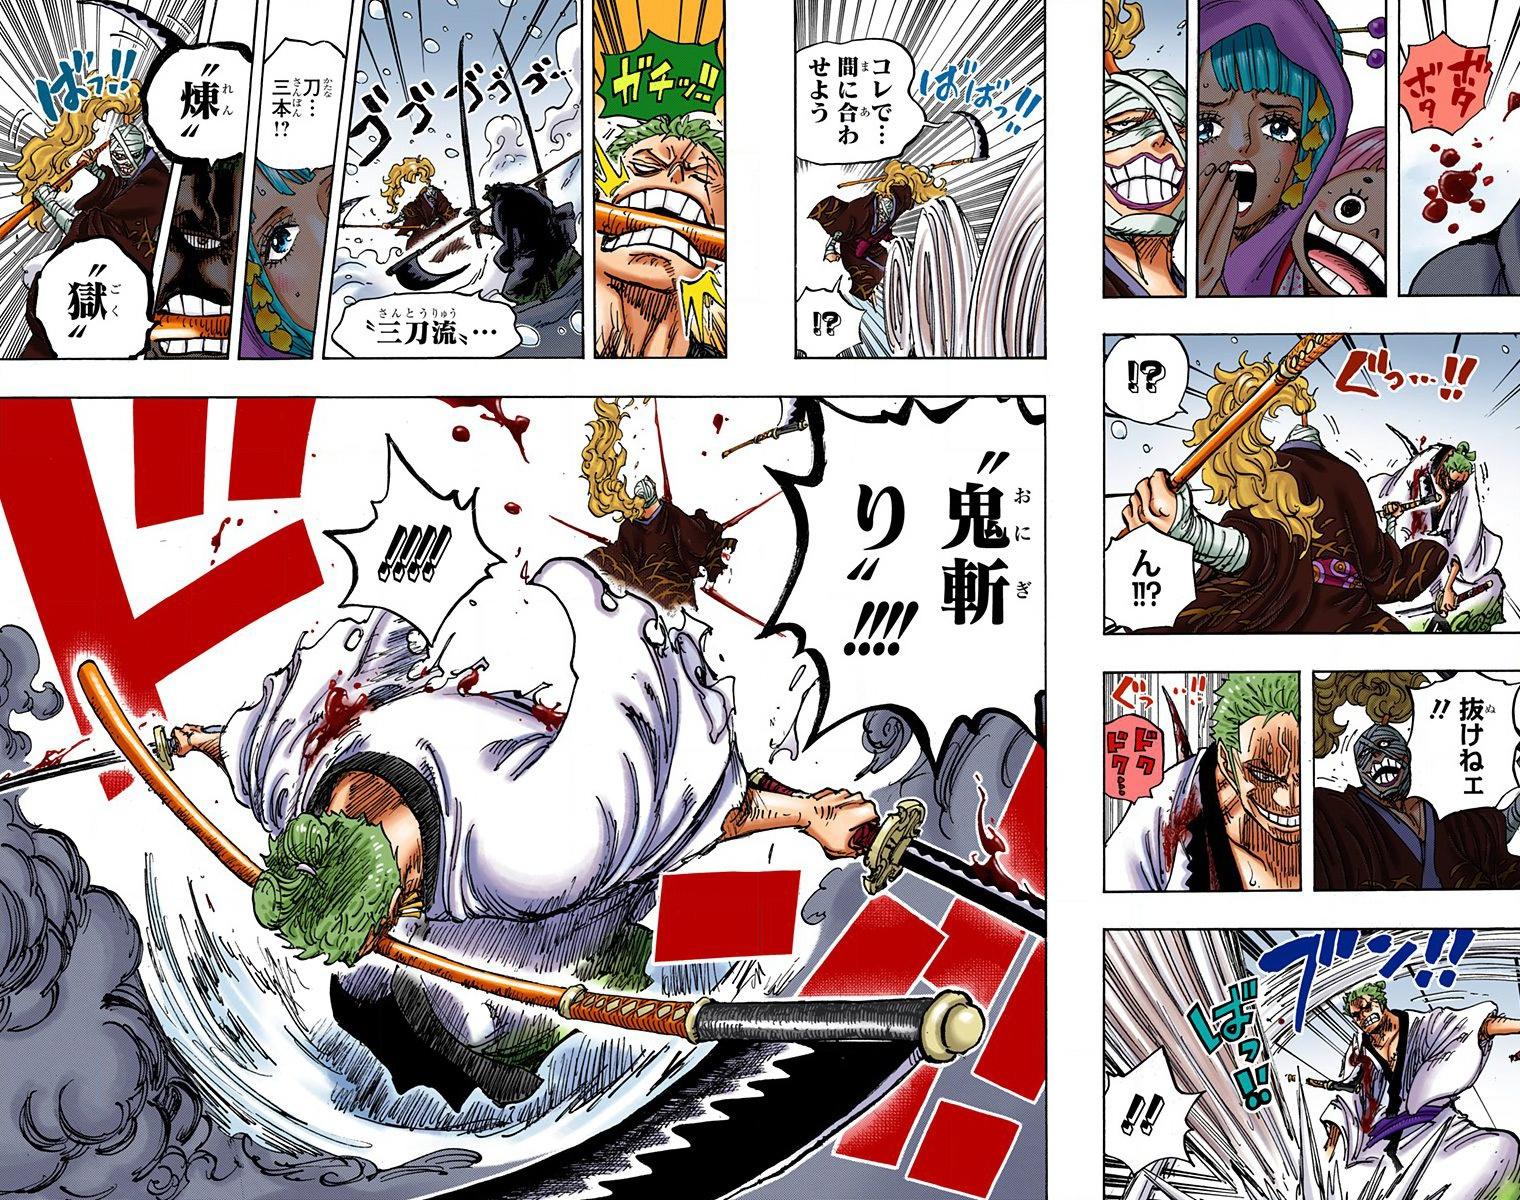 Differences between episode 1022 and chapter 1006 : r/OnePiece